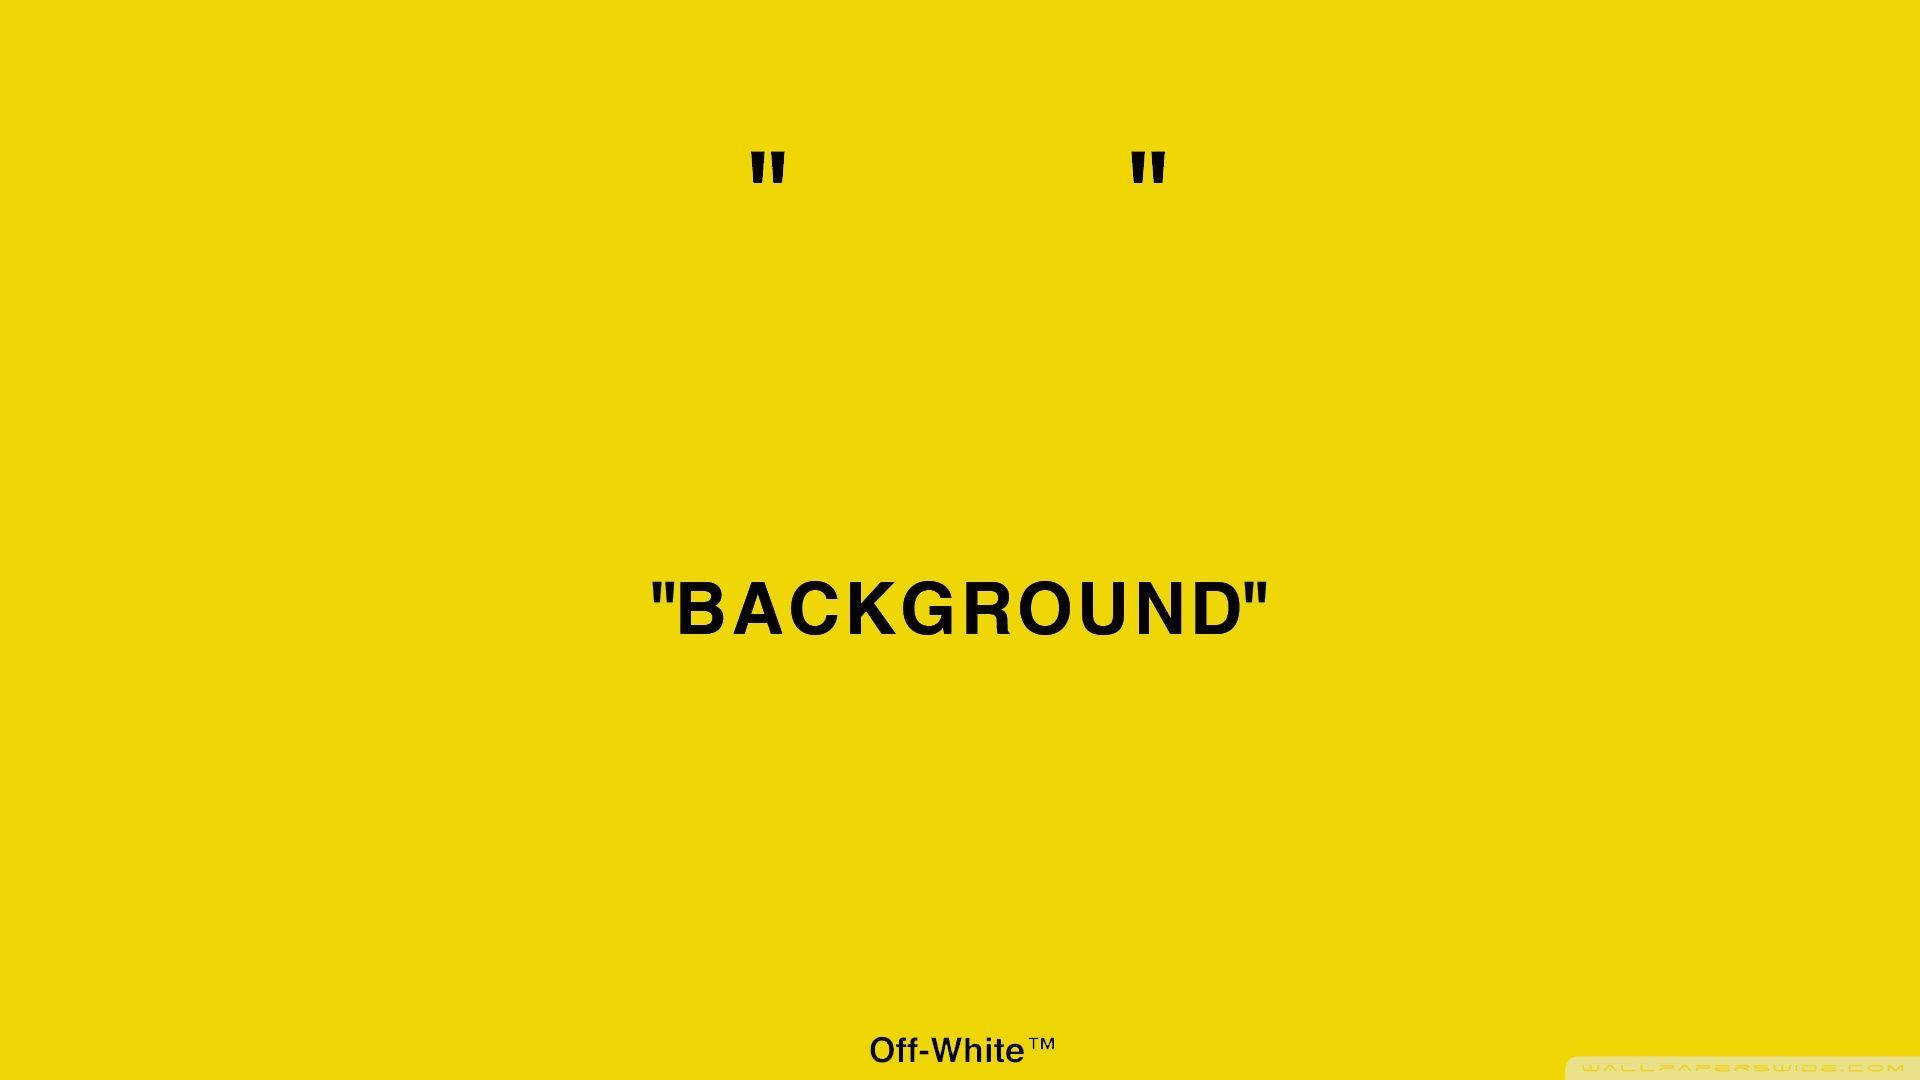 Free Off White Wallpaper Downloads, [100+] Off White Wallpapers for FREE |  